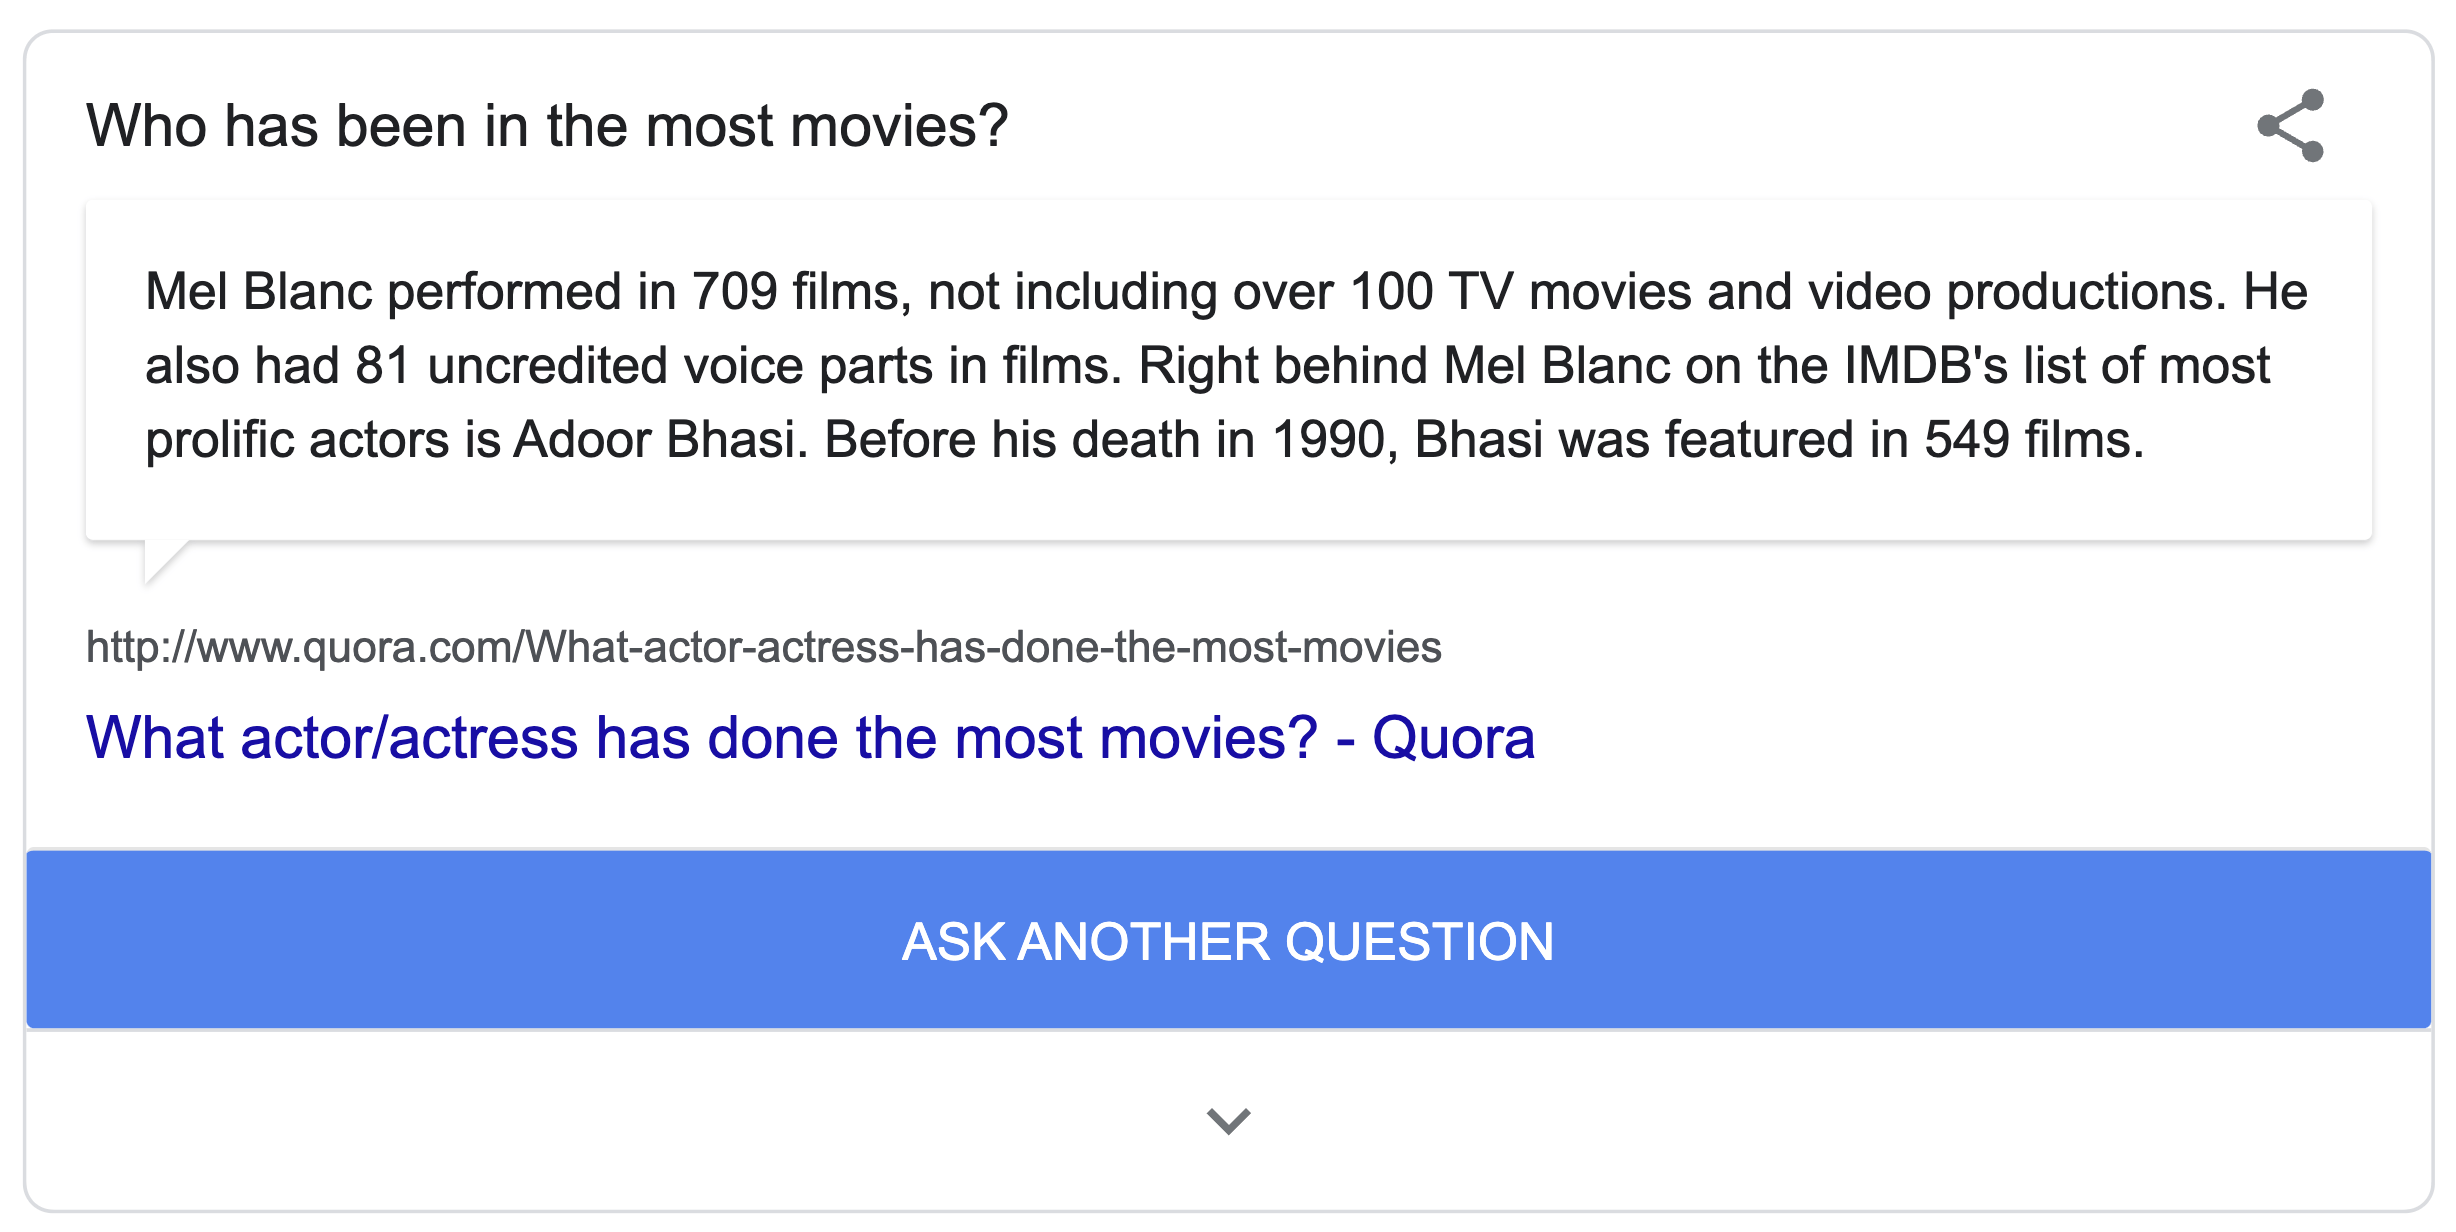 I'm feeling curious: who has been in most movies?